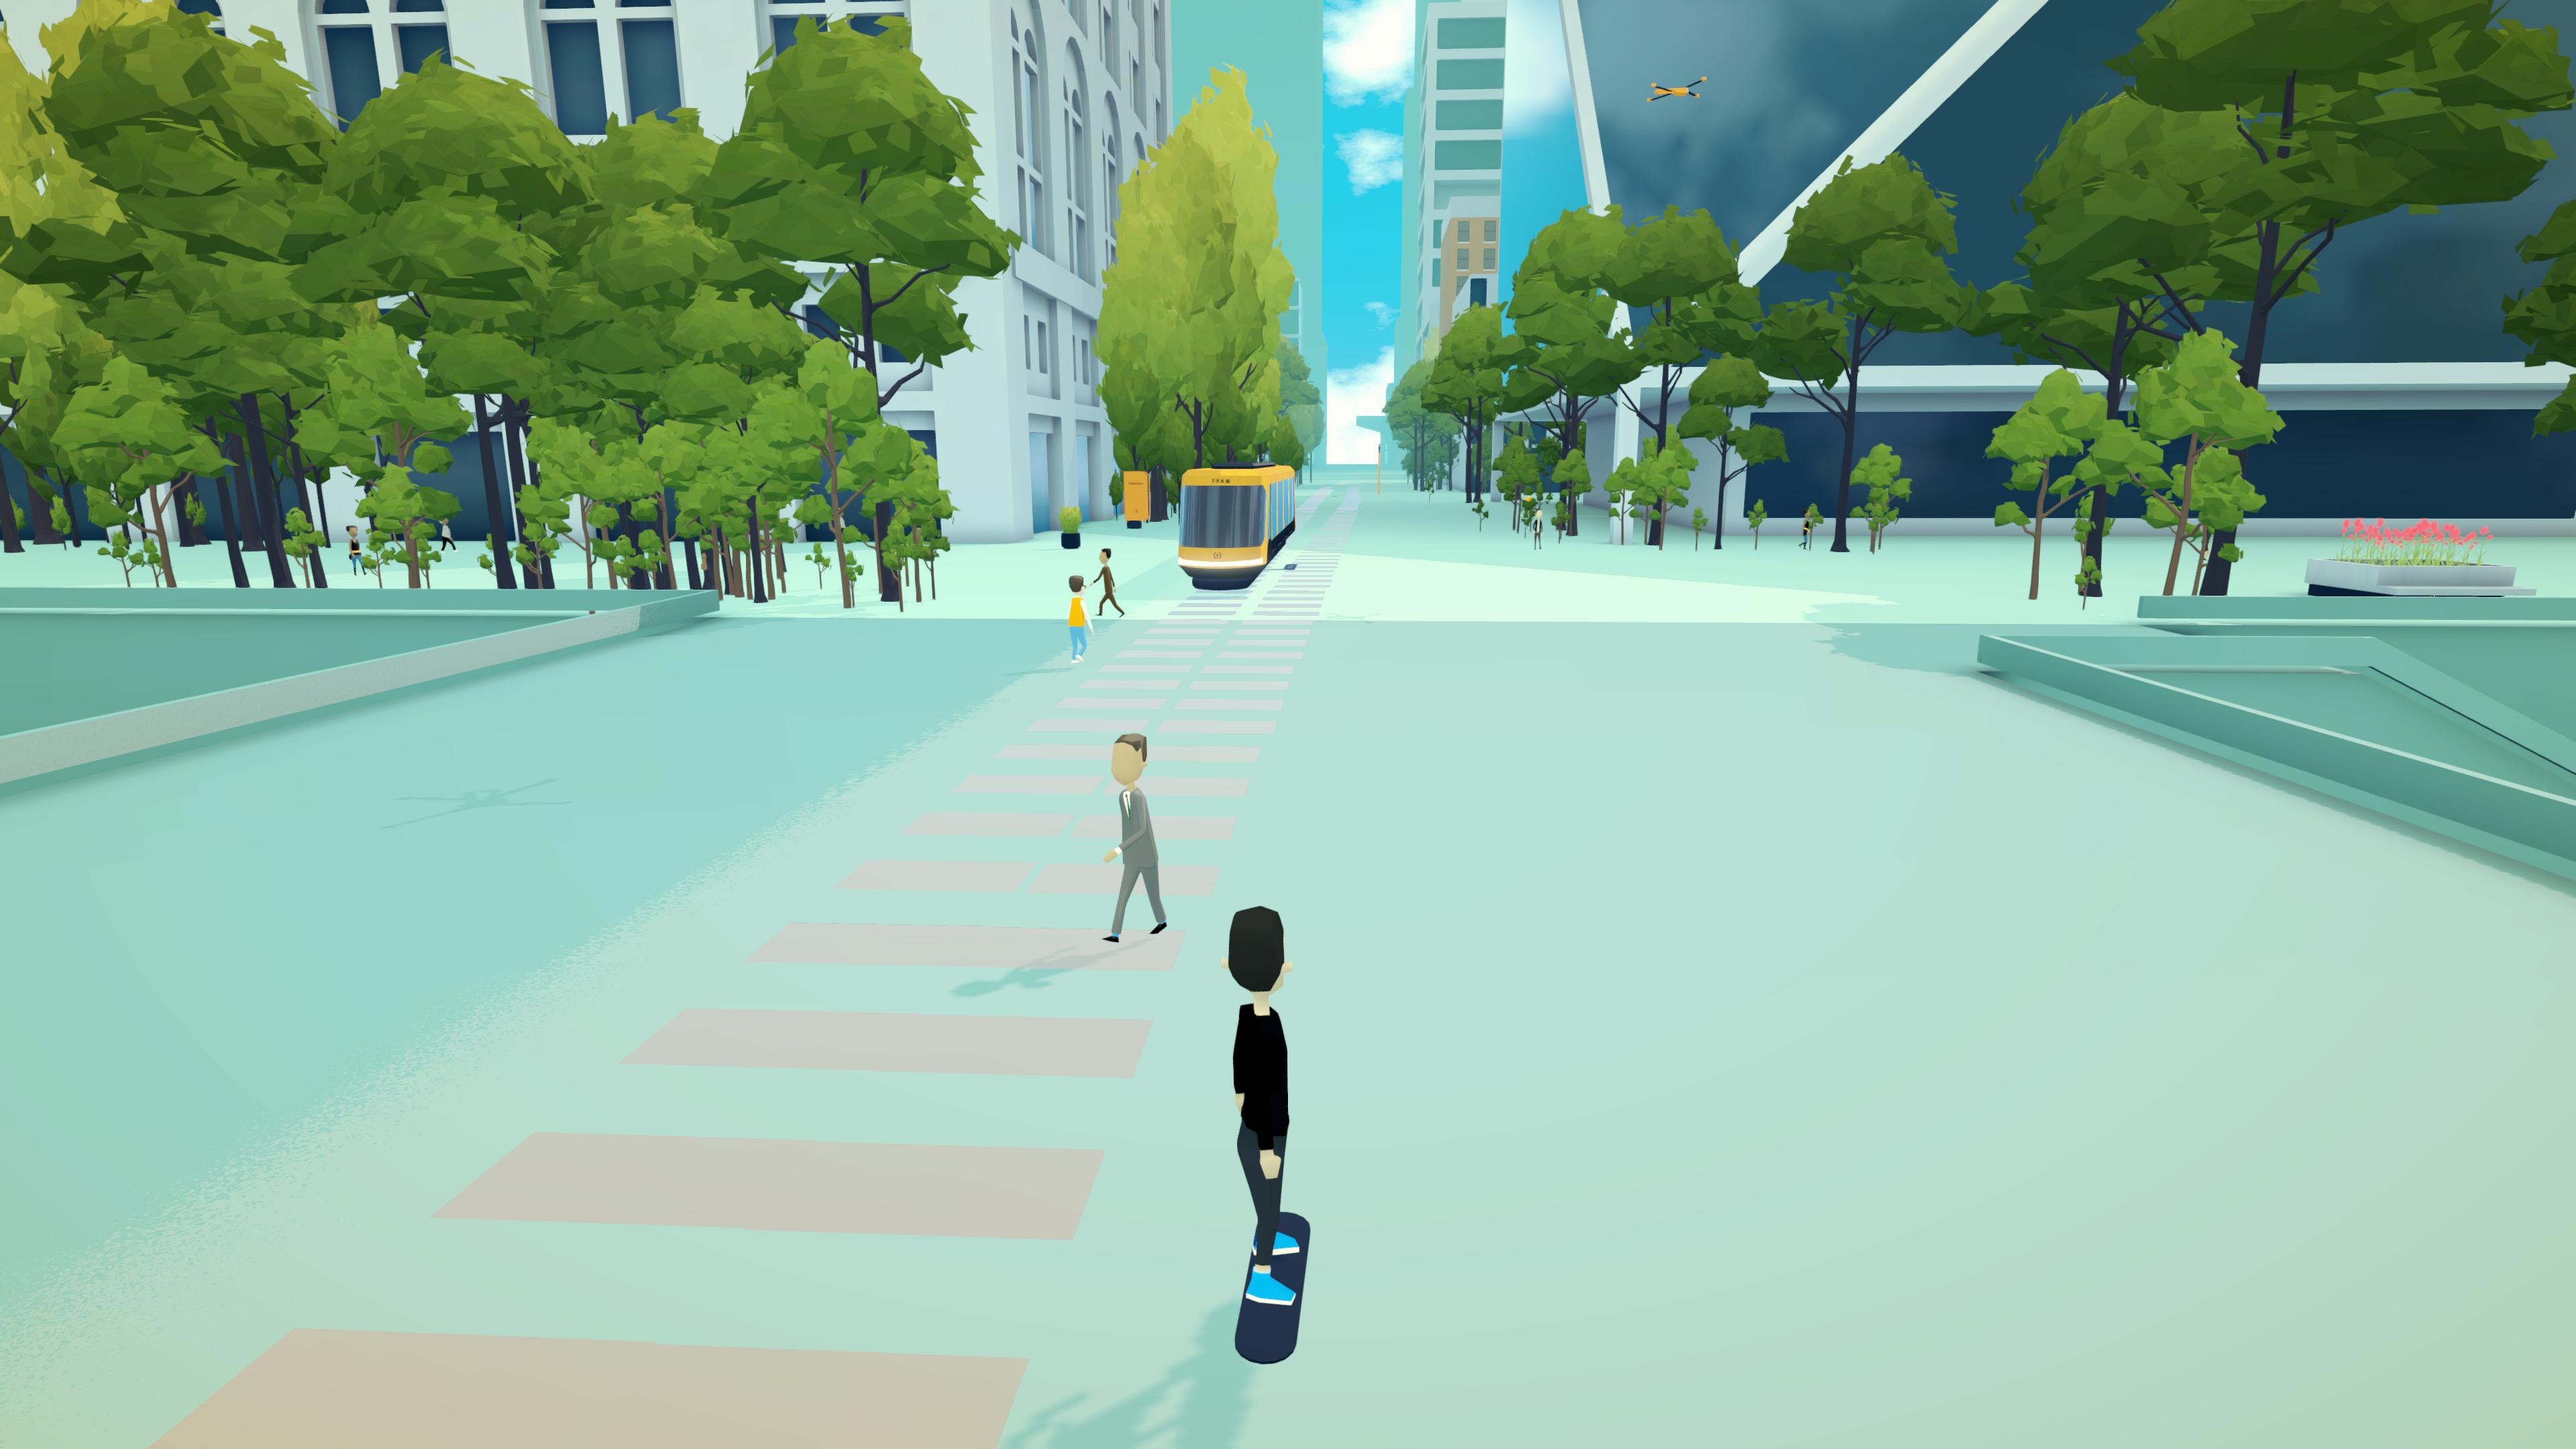 Protagonist riding hoverboard down the street